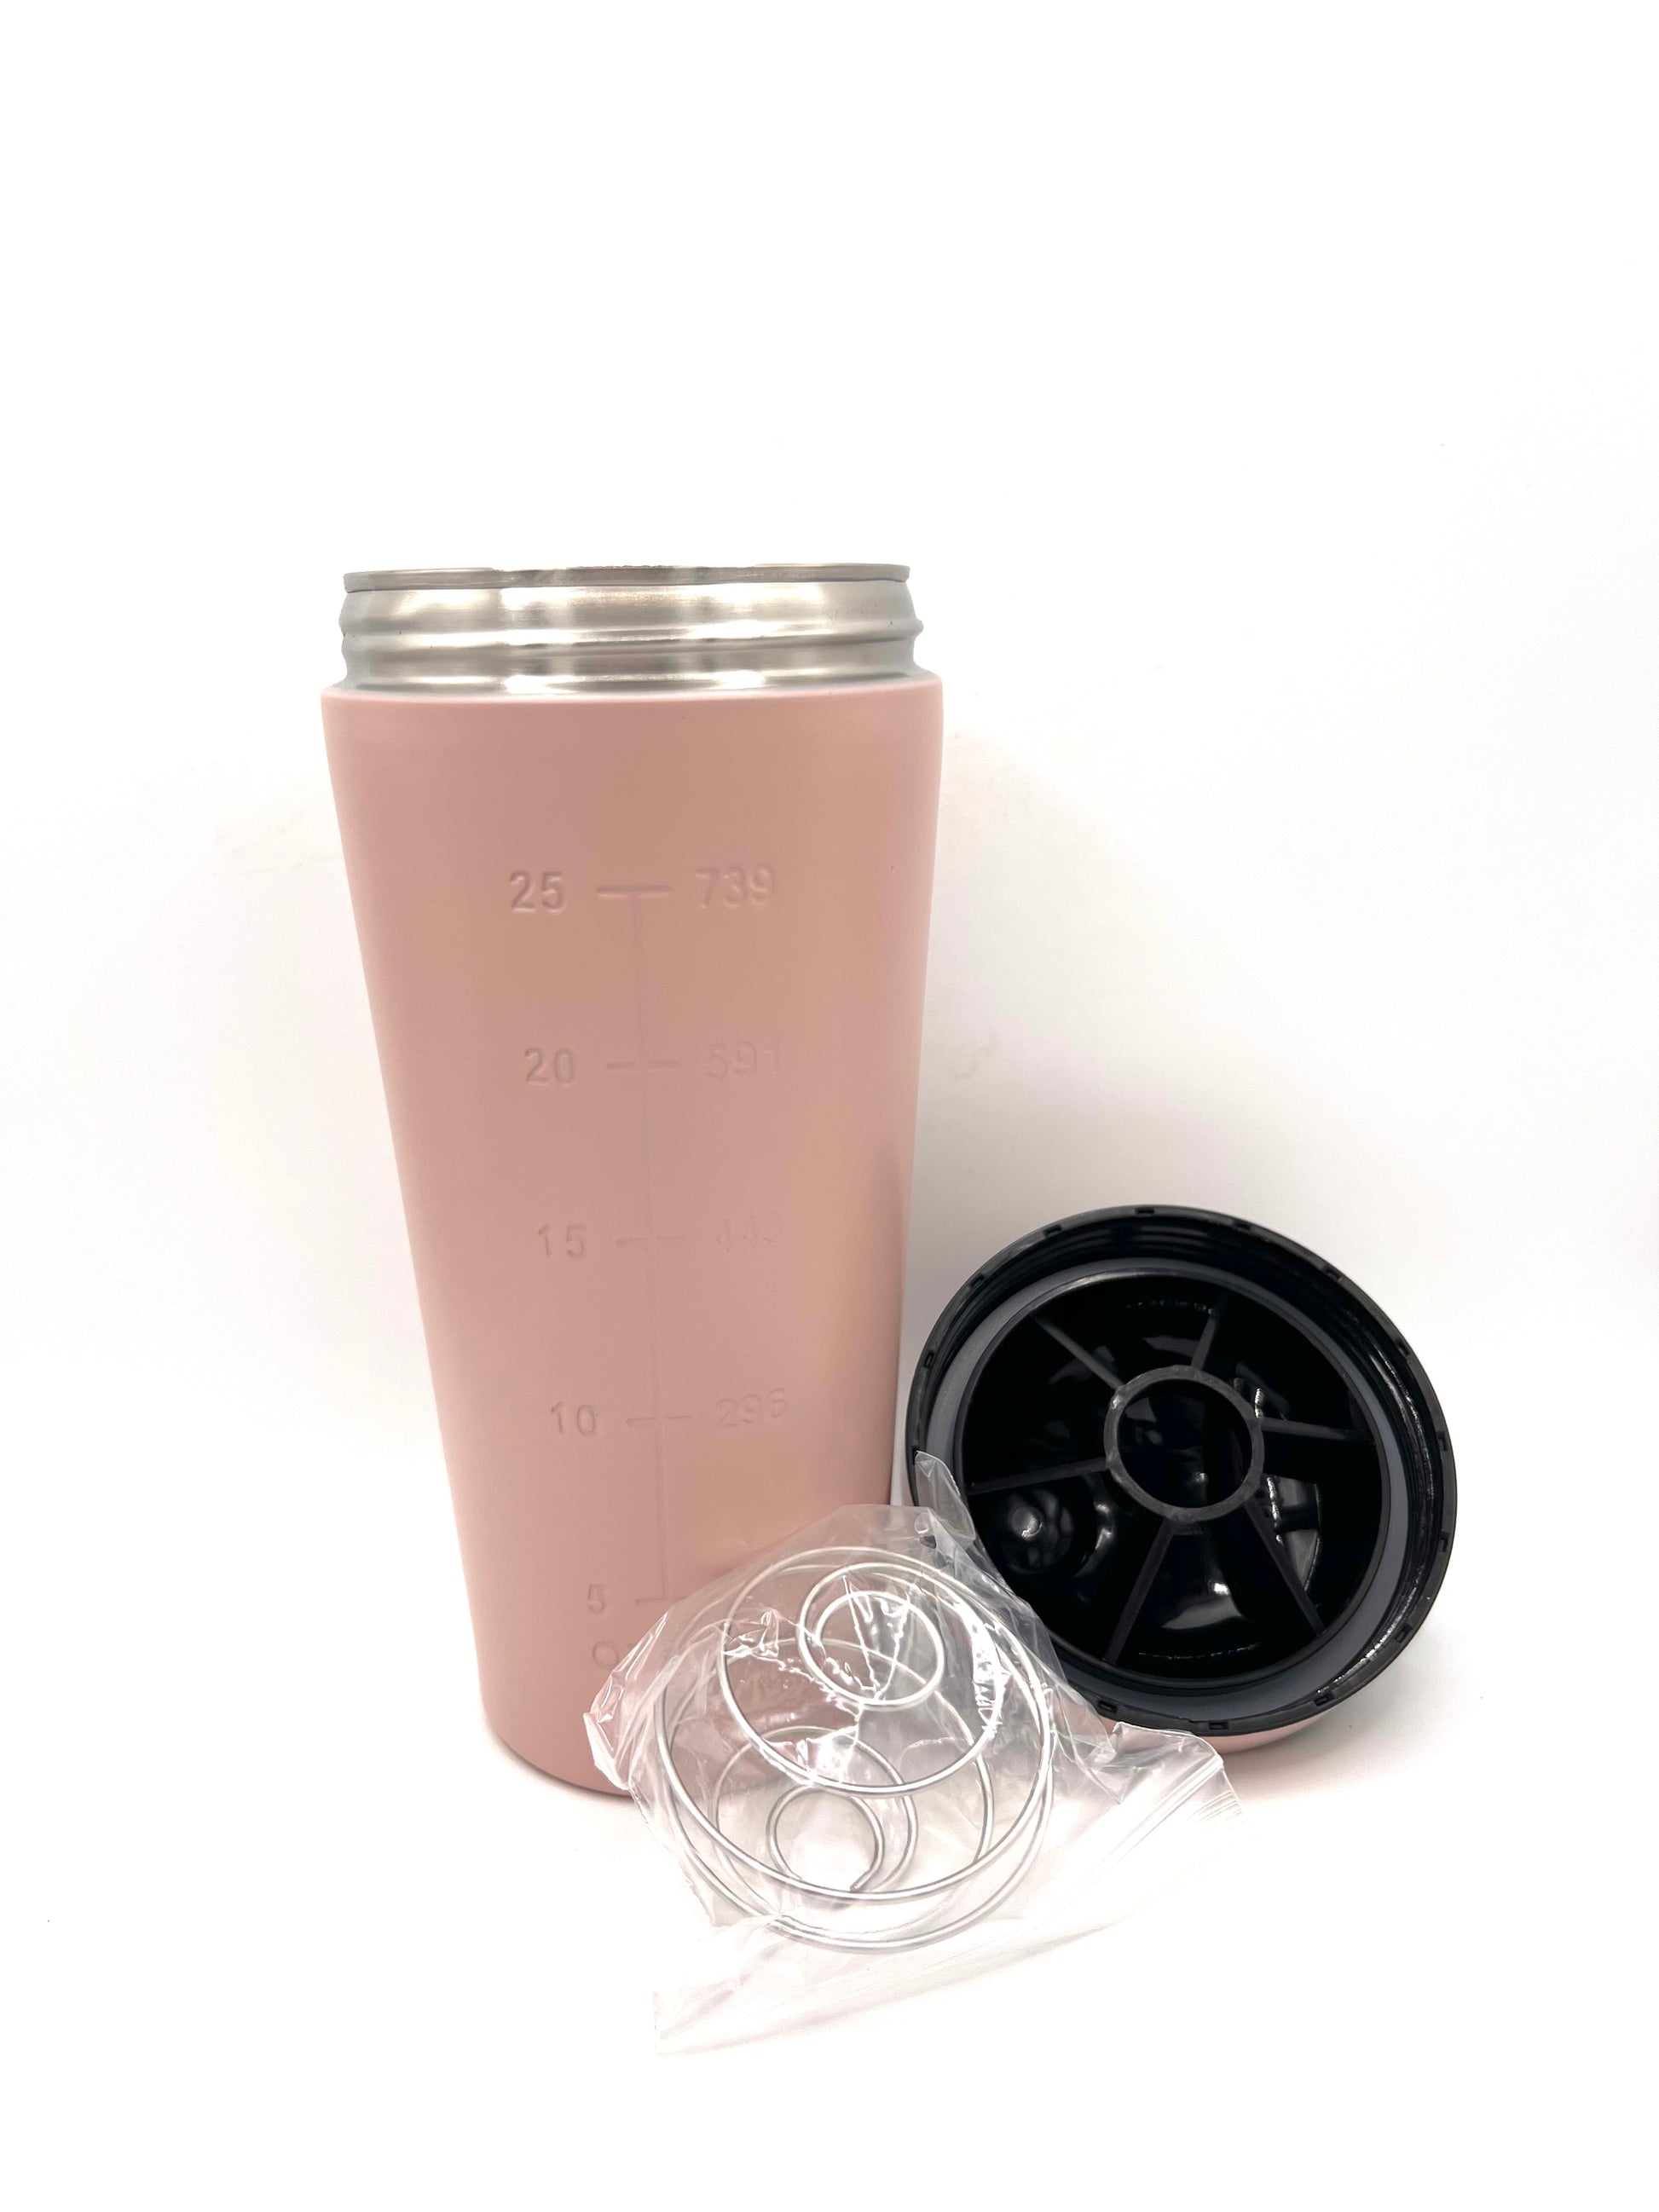 Engraved Stainless Steel Protein Shaker Christmas Gift